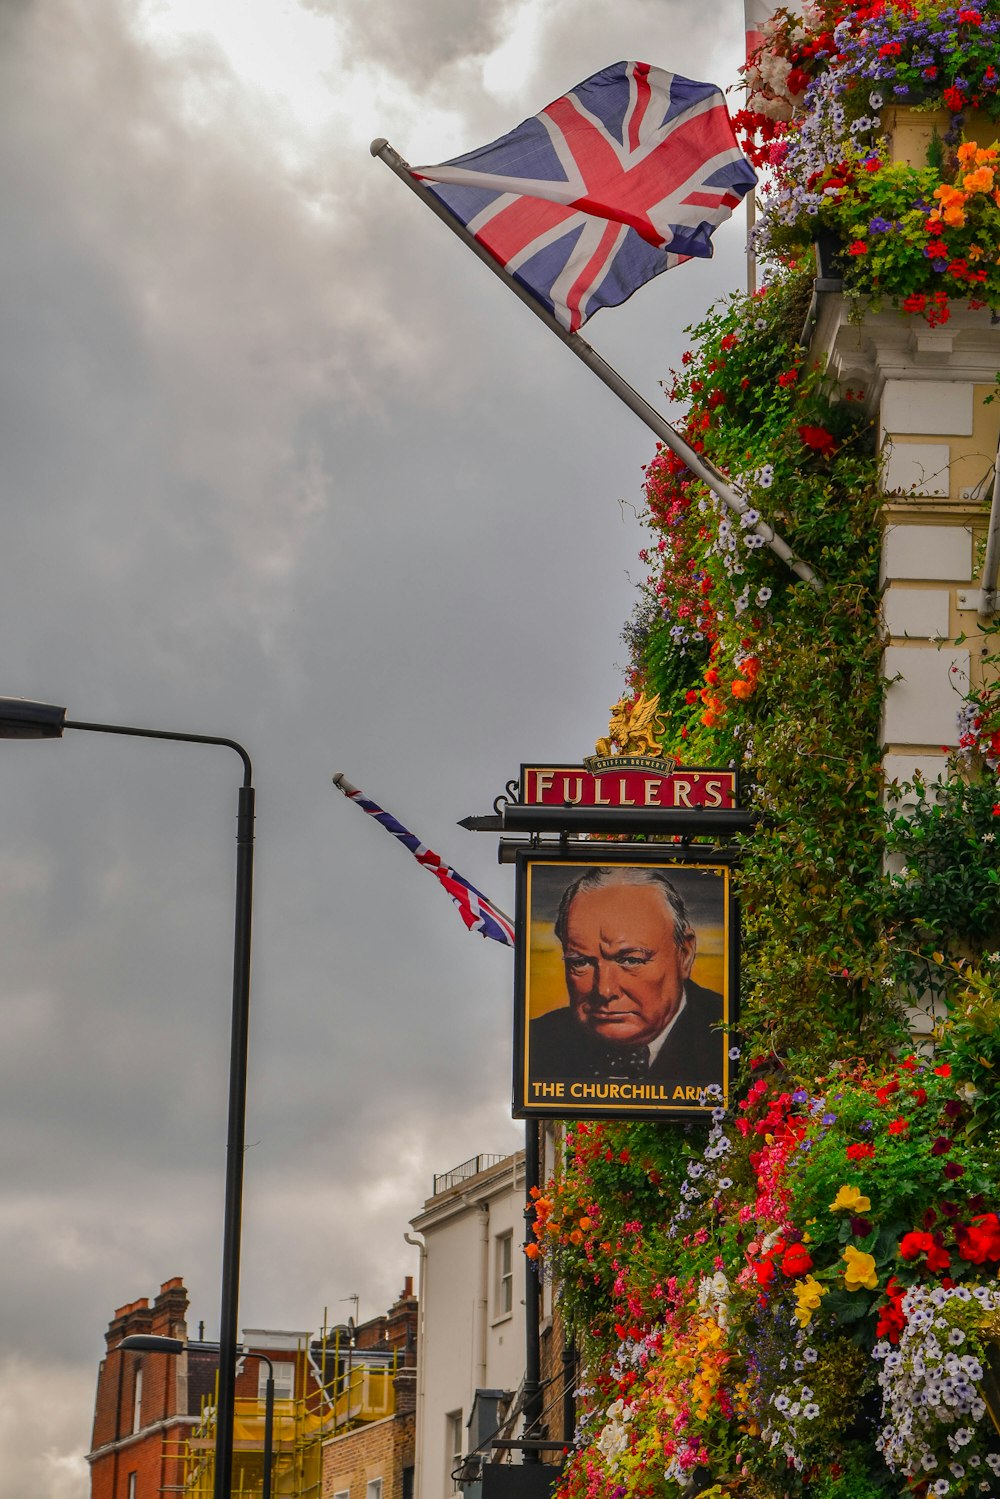 Fullers signage